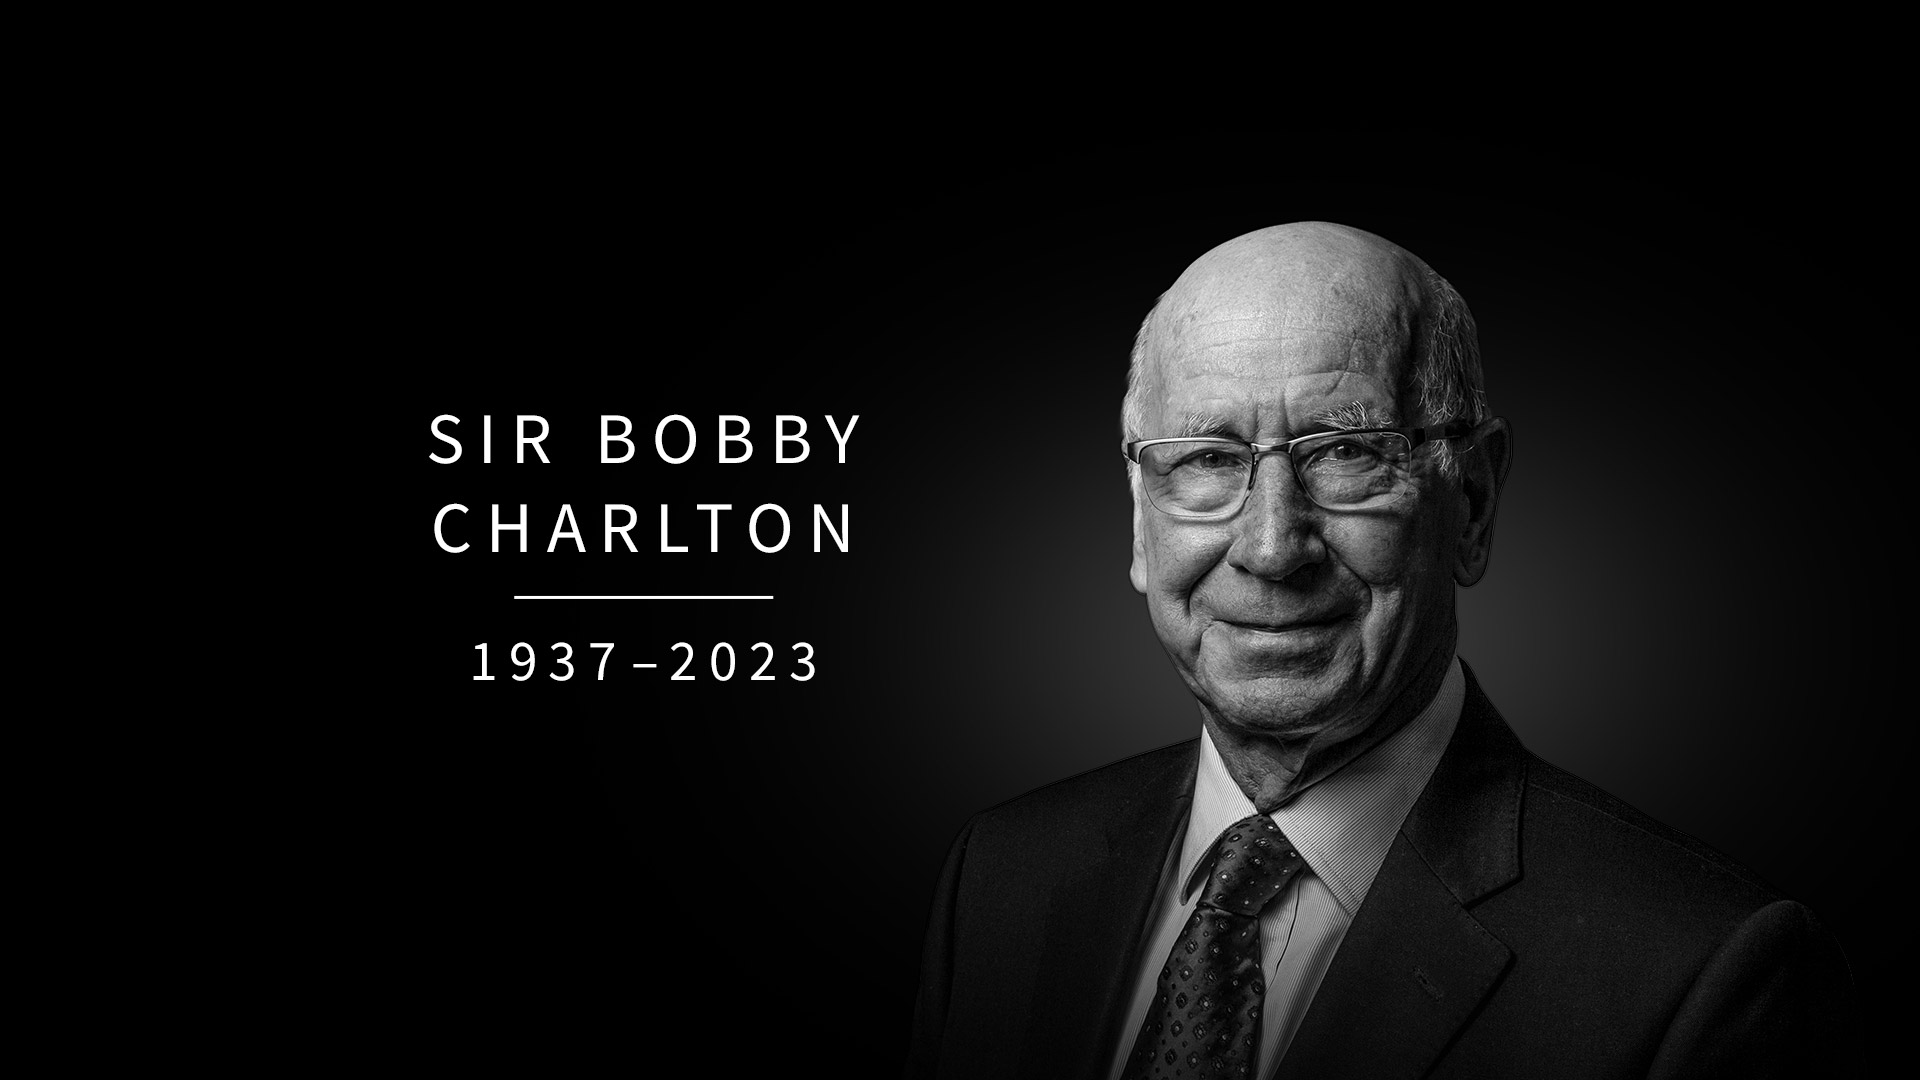 Manchester United legend Sir Bobby Charlton has passed away